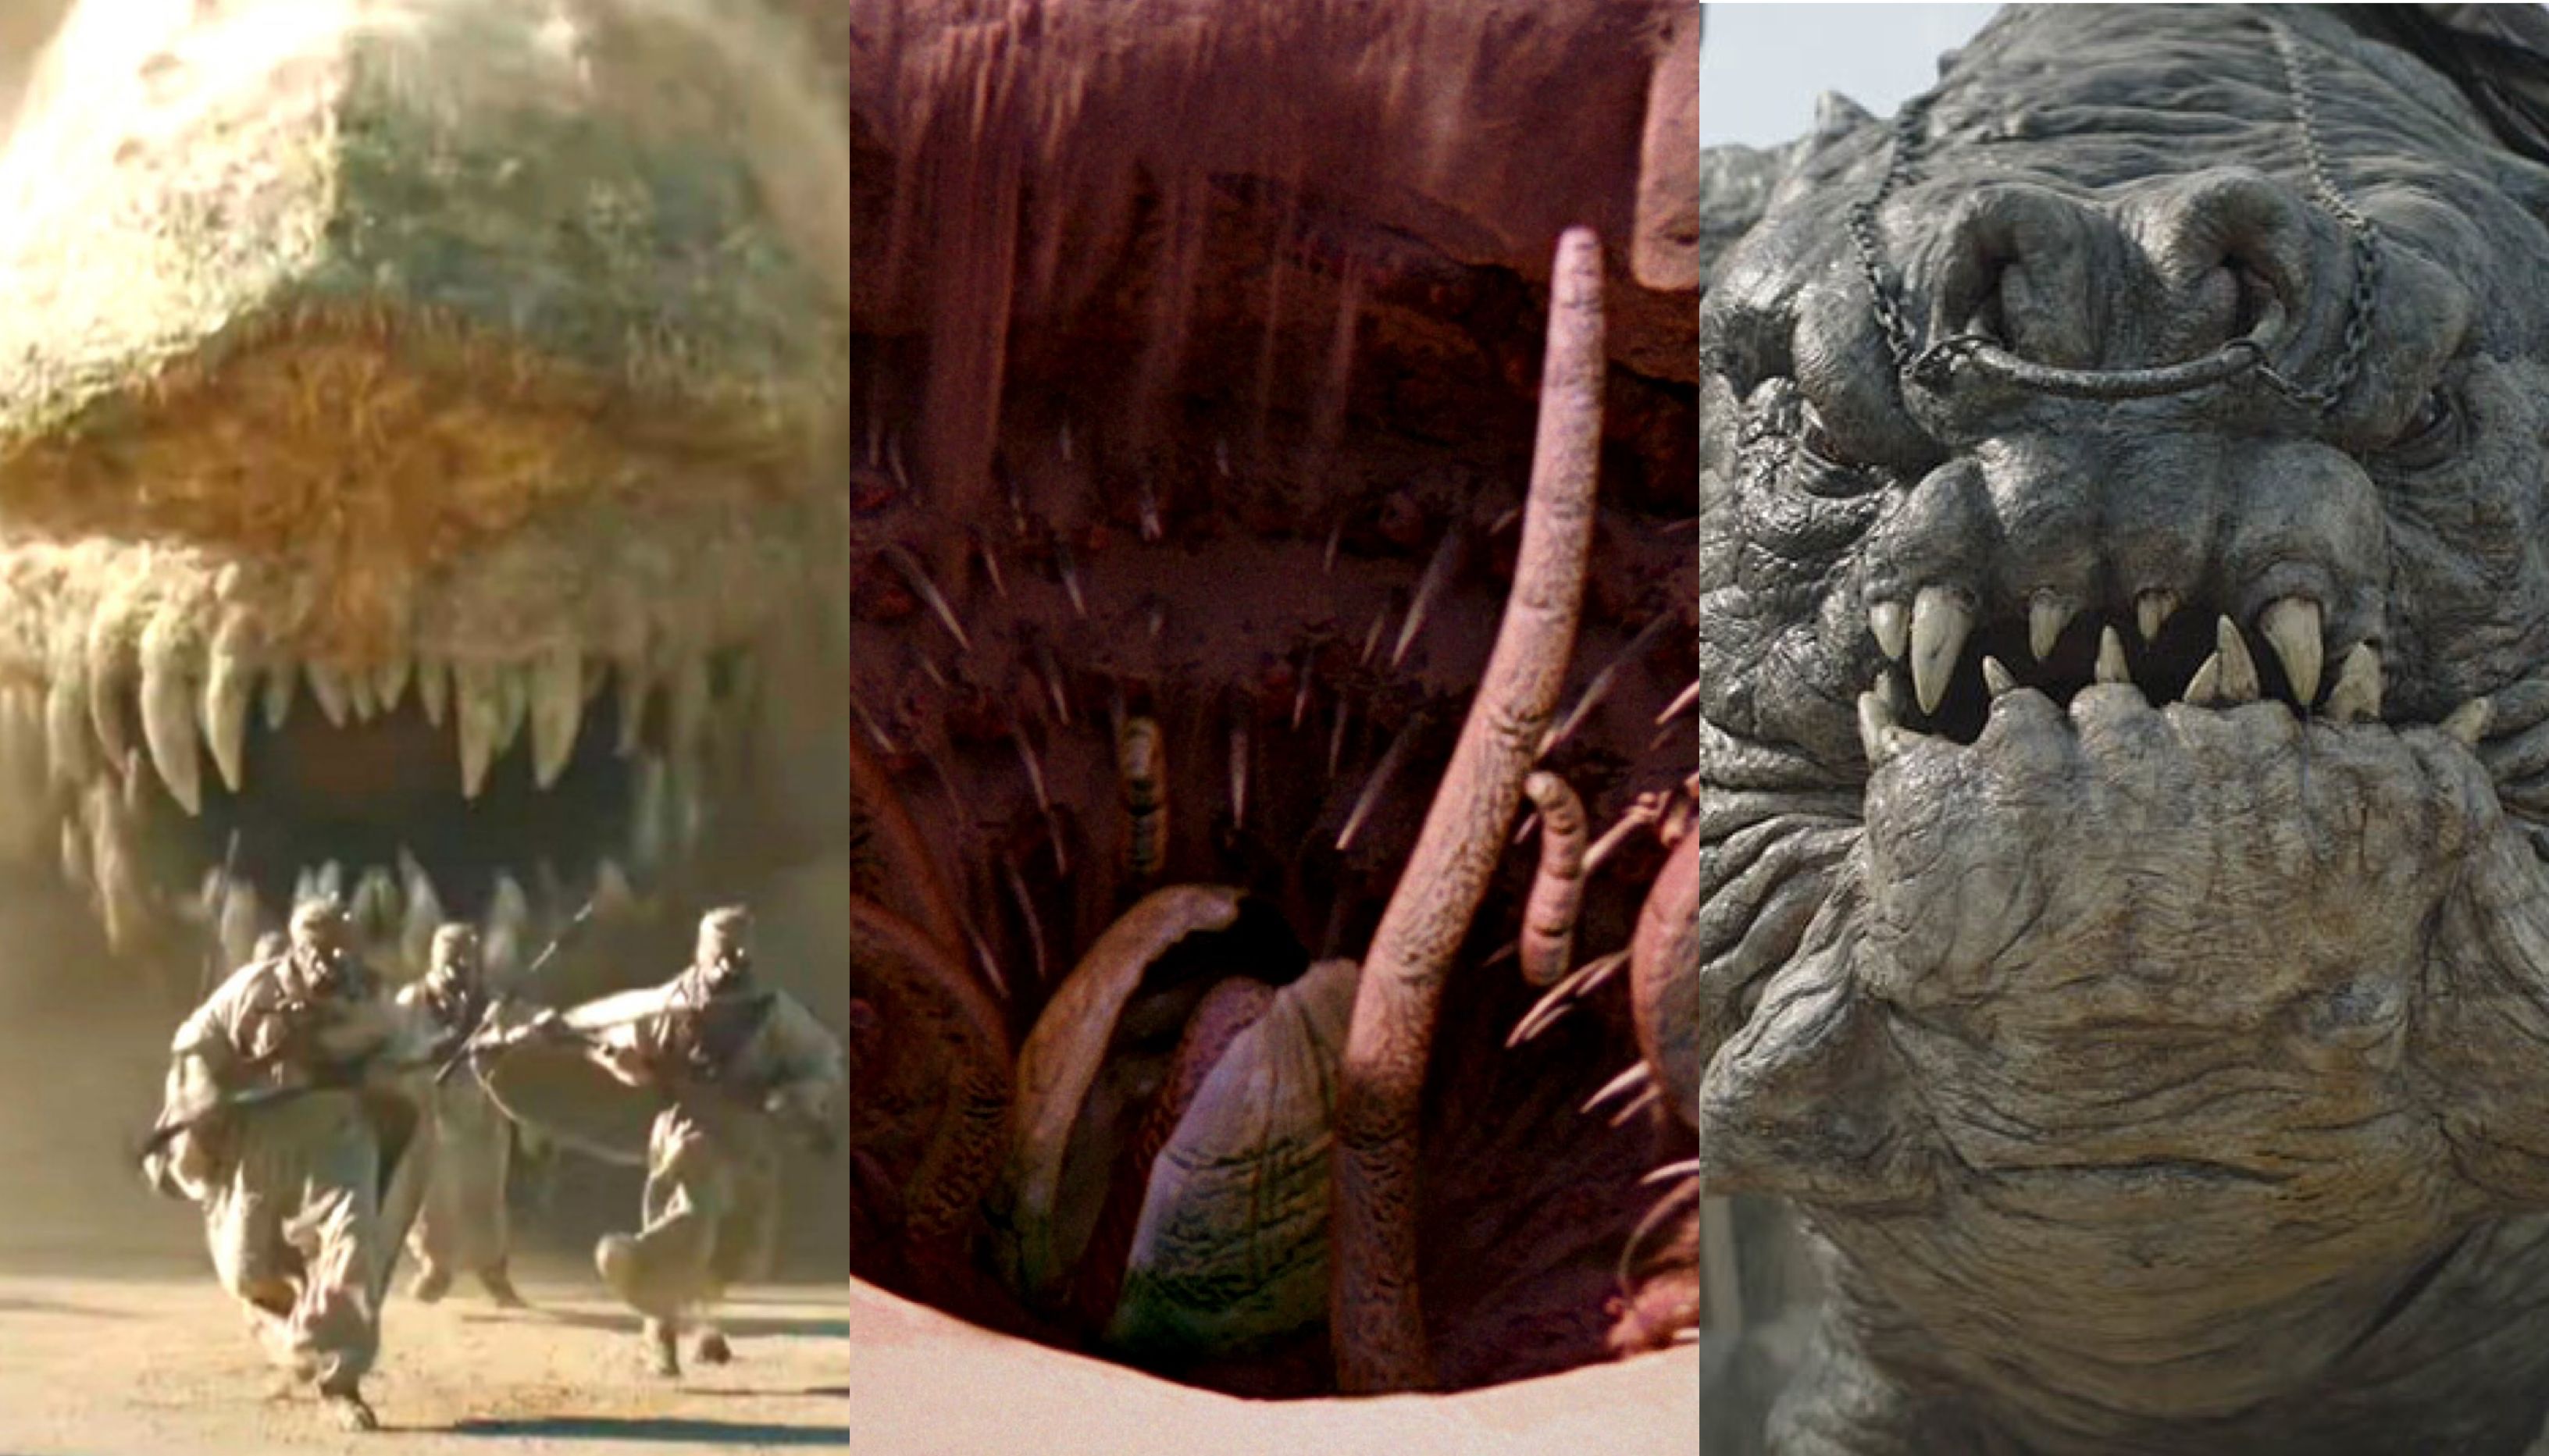 Scariest Star Wars Monsters: krayt dragon (left), sarlacc (middle), and rancor (right)